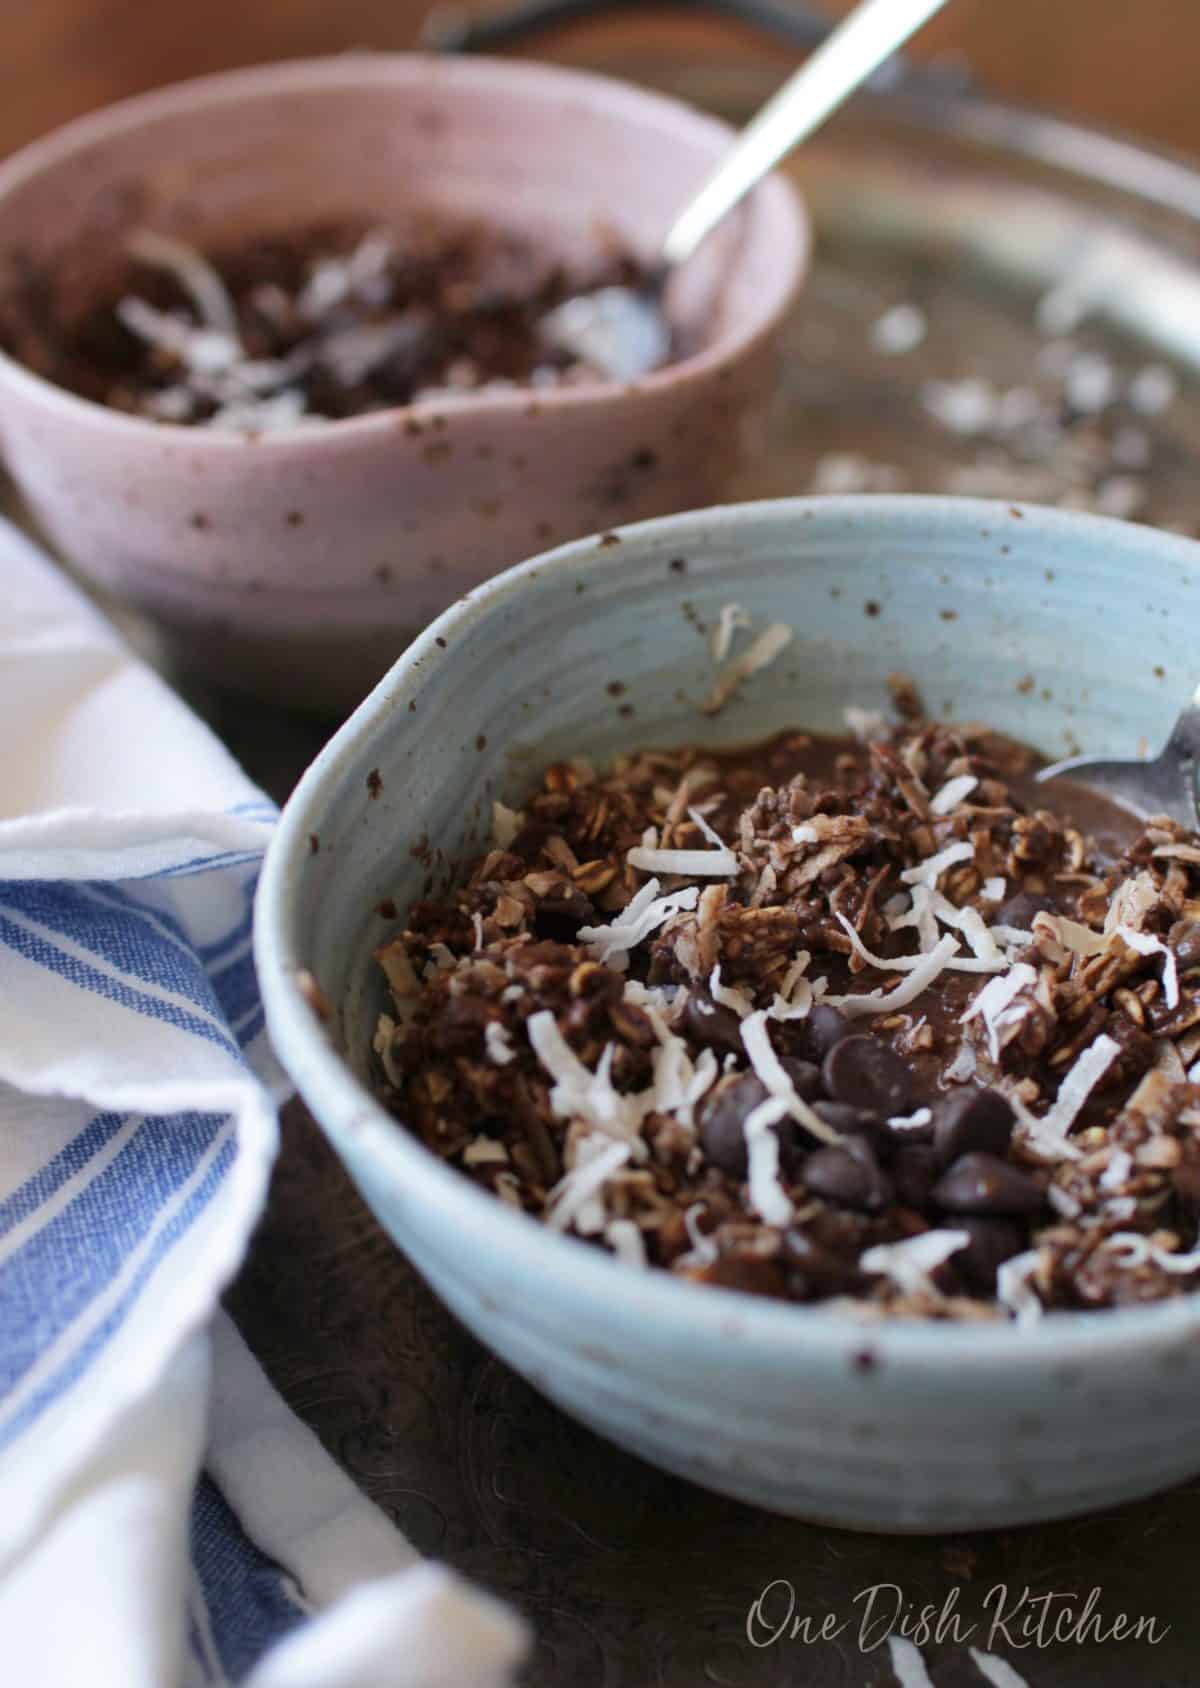 Two mocha oatmeal bowls topped with coconut shavings on a metal tray